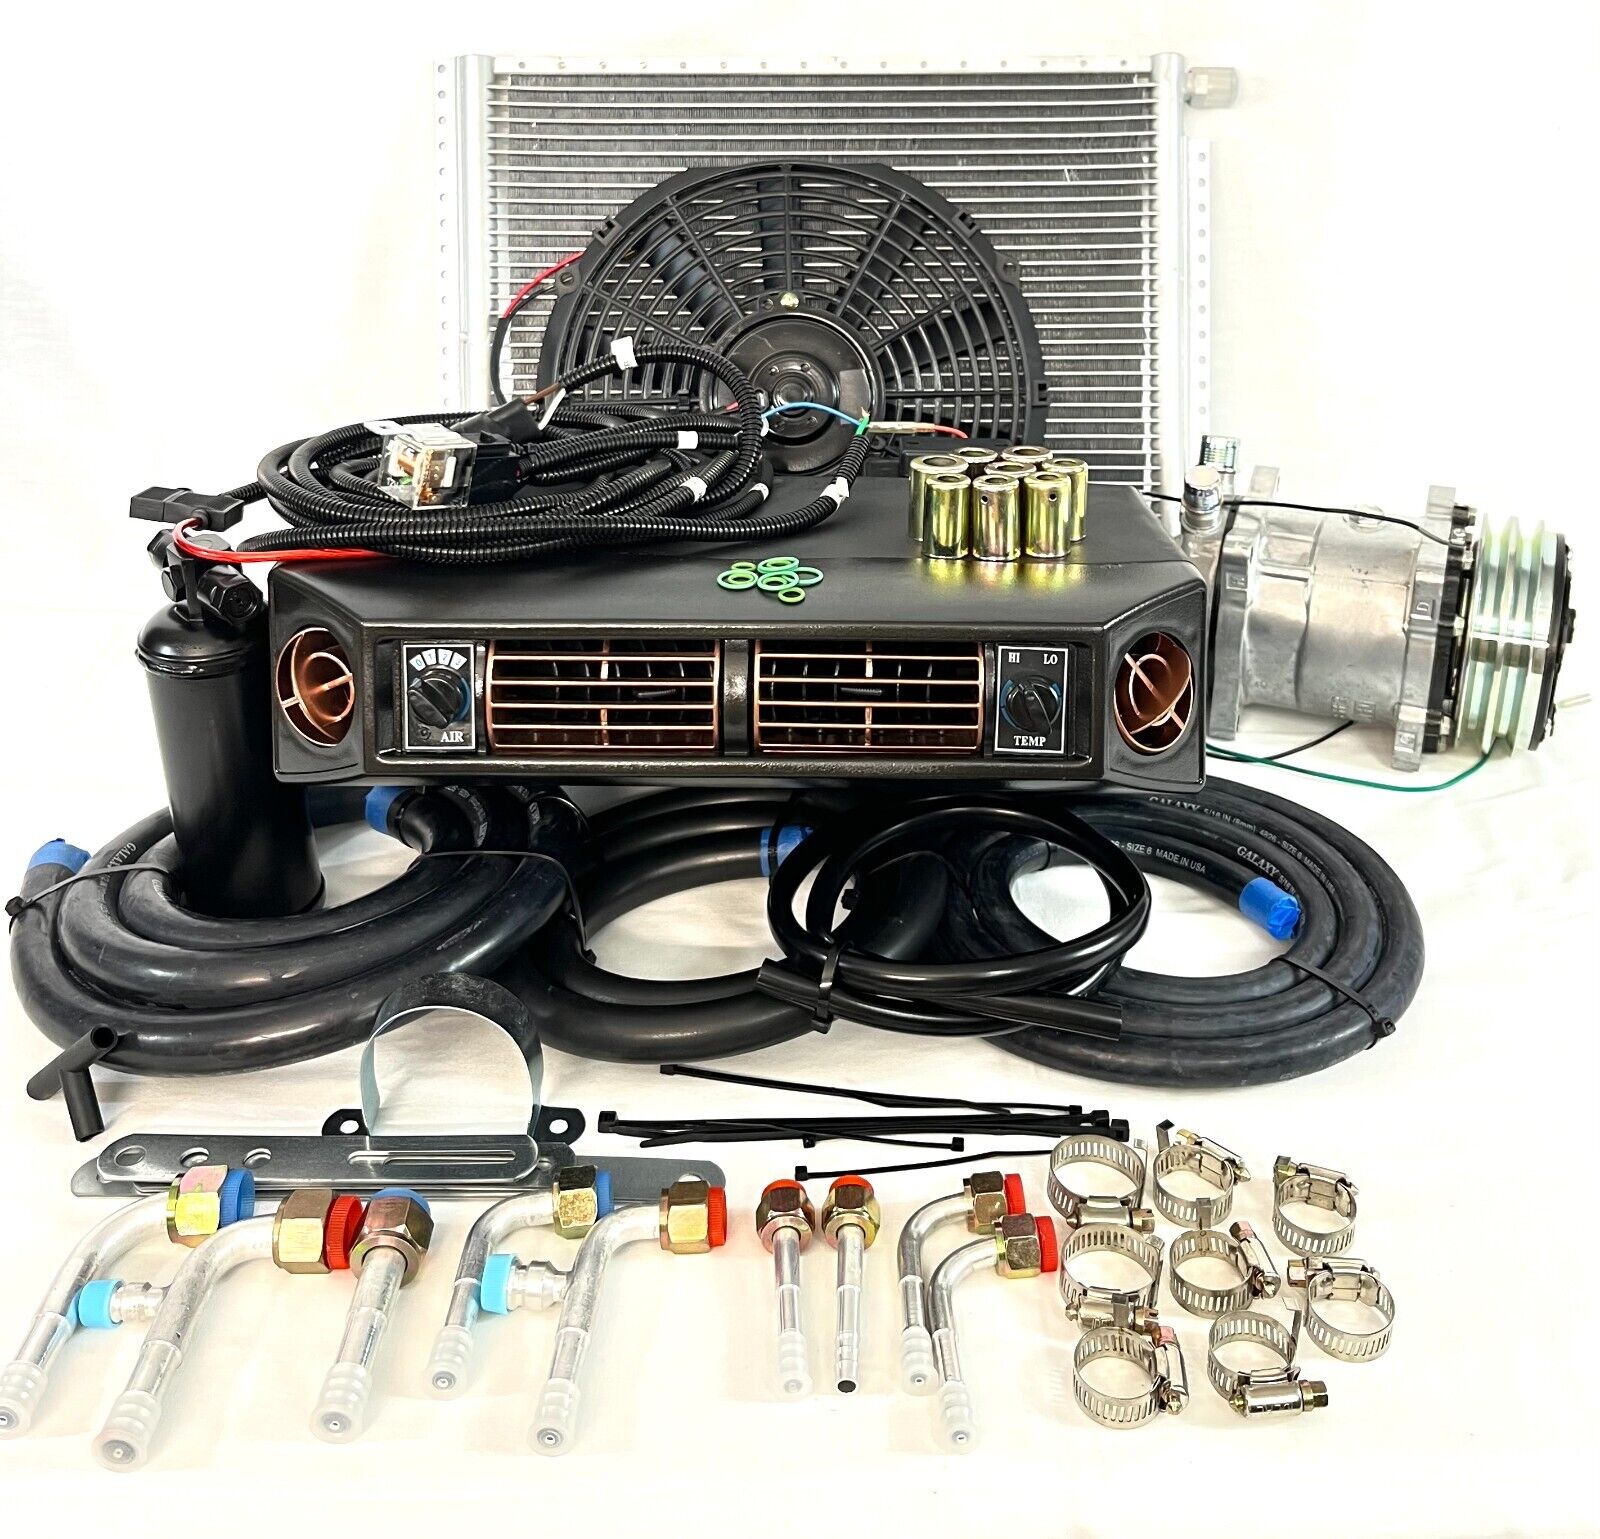 A/C KIT UNIVERSAL UNDER DASH EVAPORATOR 404-100 GOLD HEAT  AND COOL ELEC HARNESS